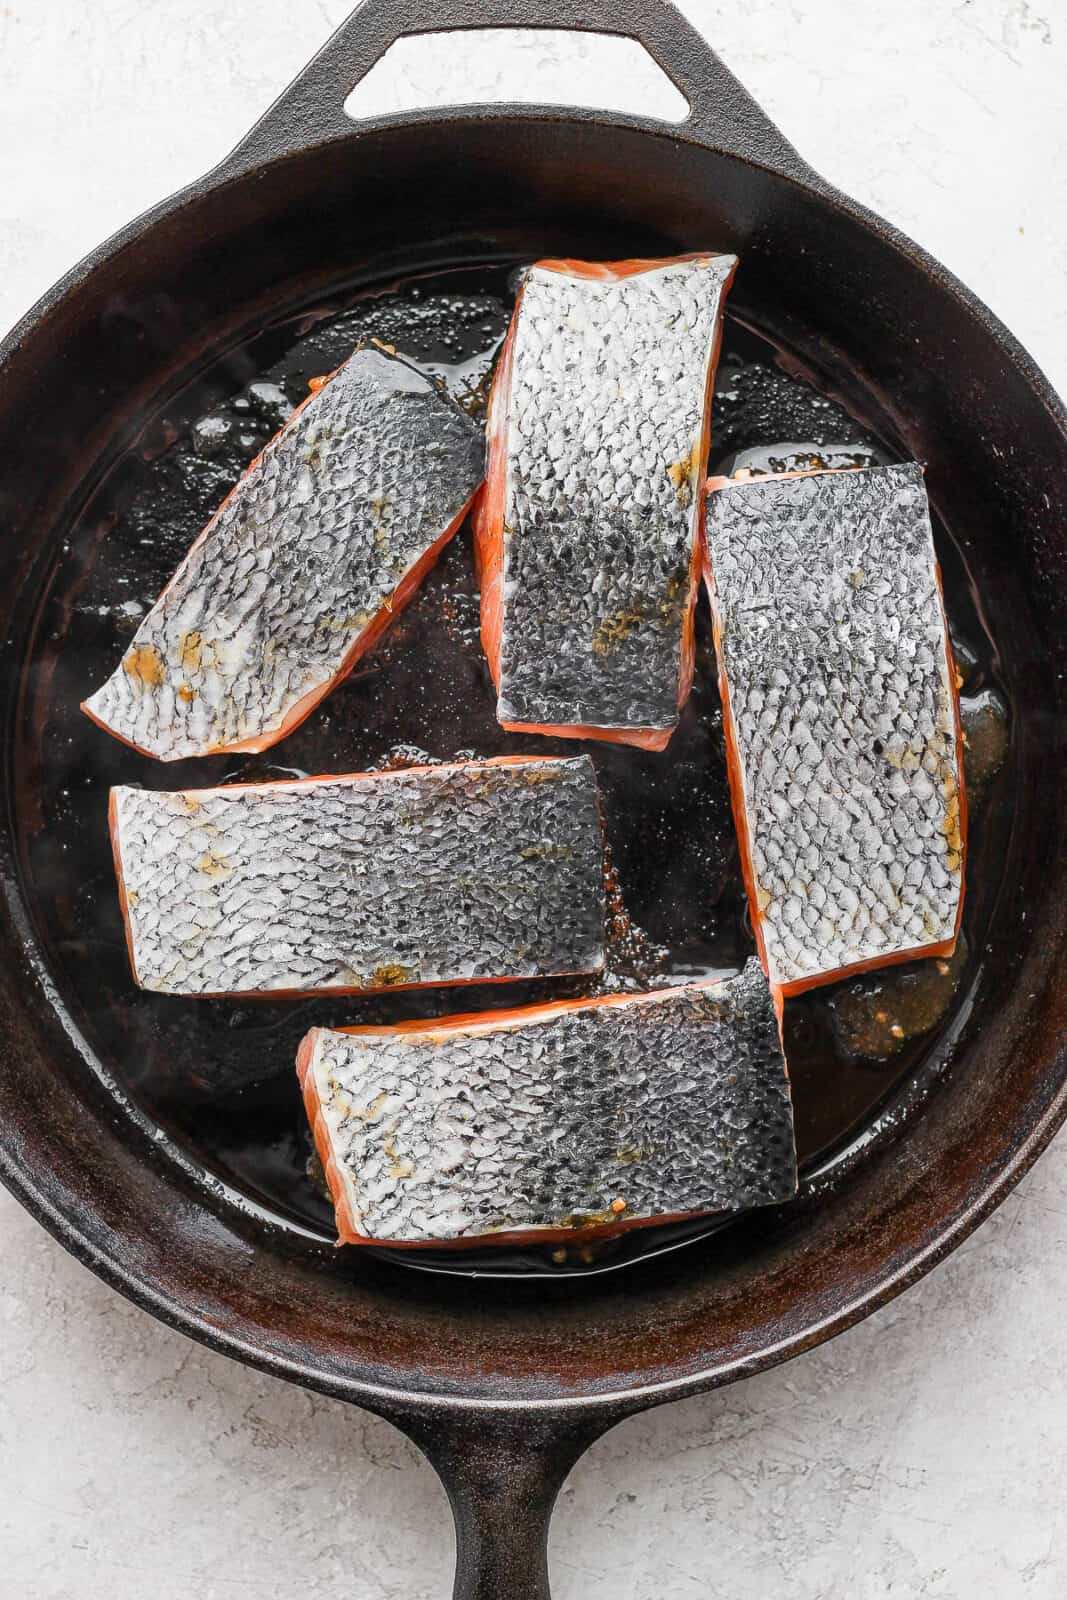 Salmon fillets being seared in a cast iron skillet.